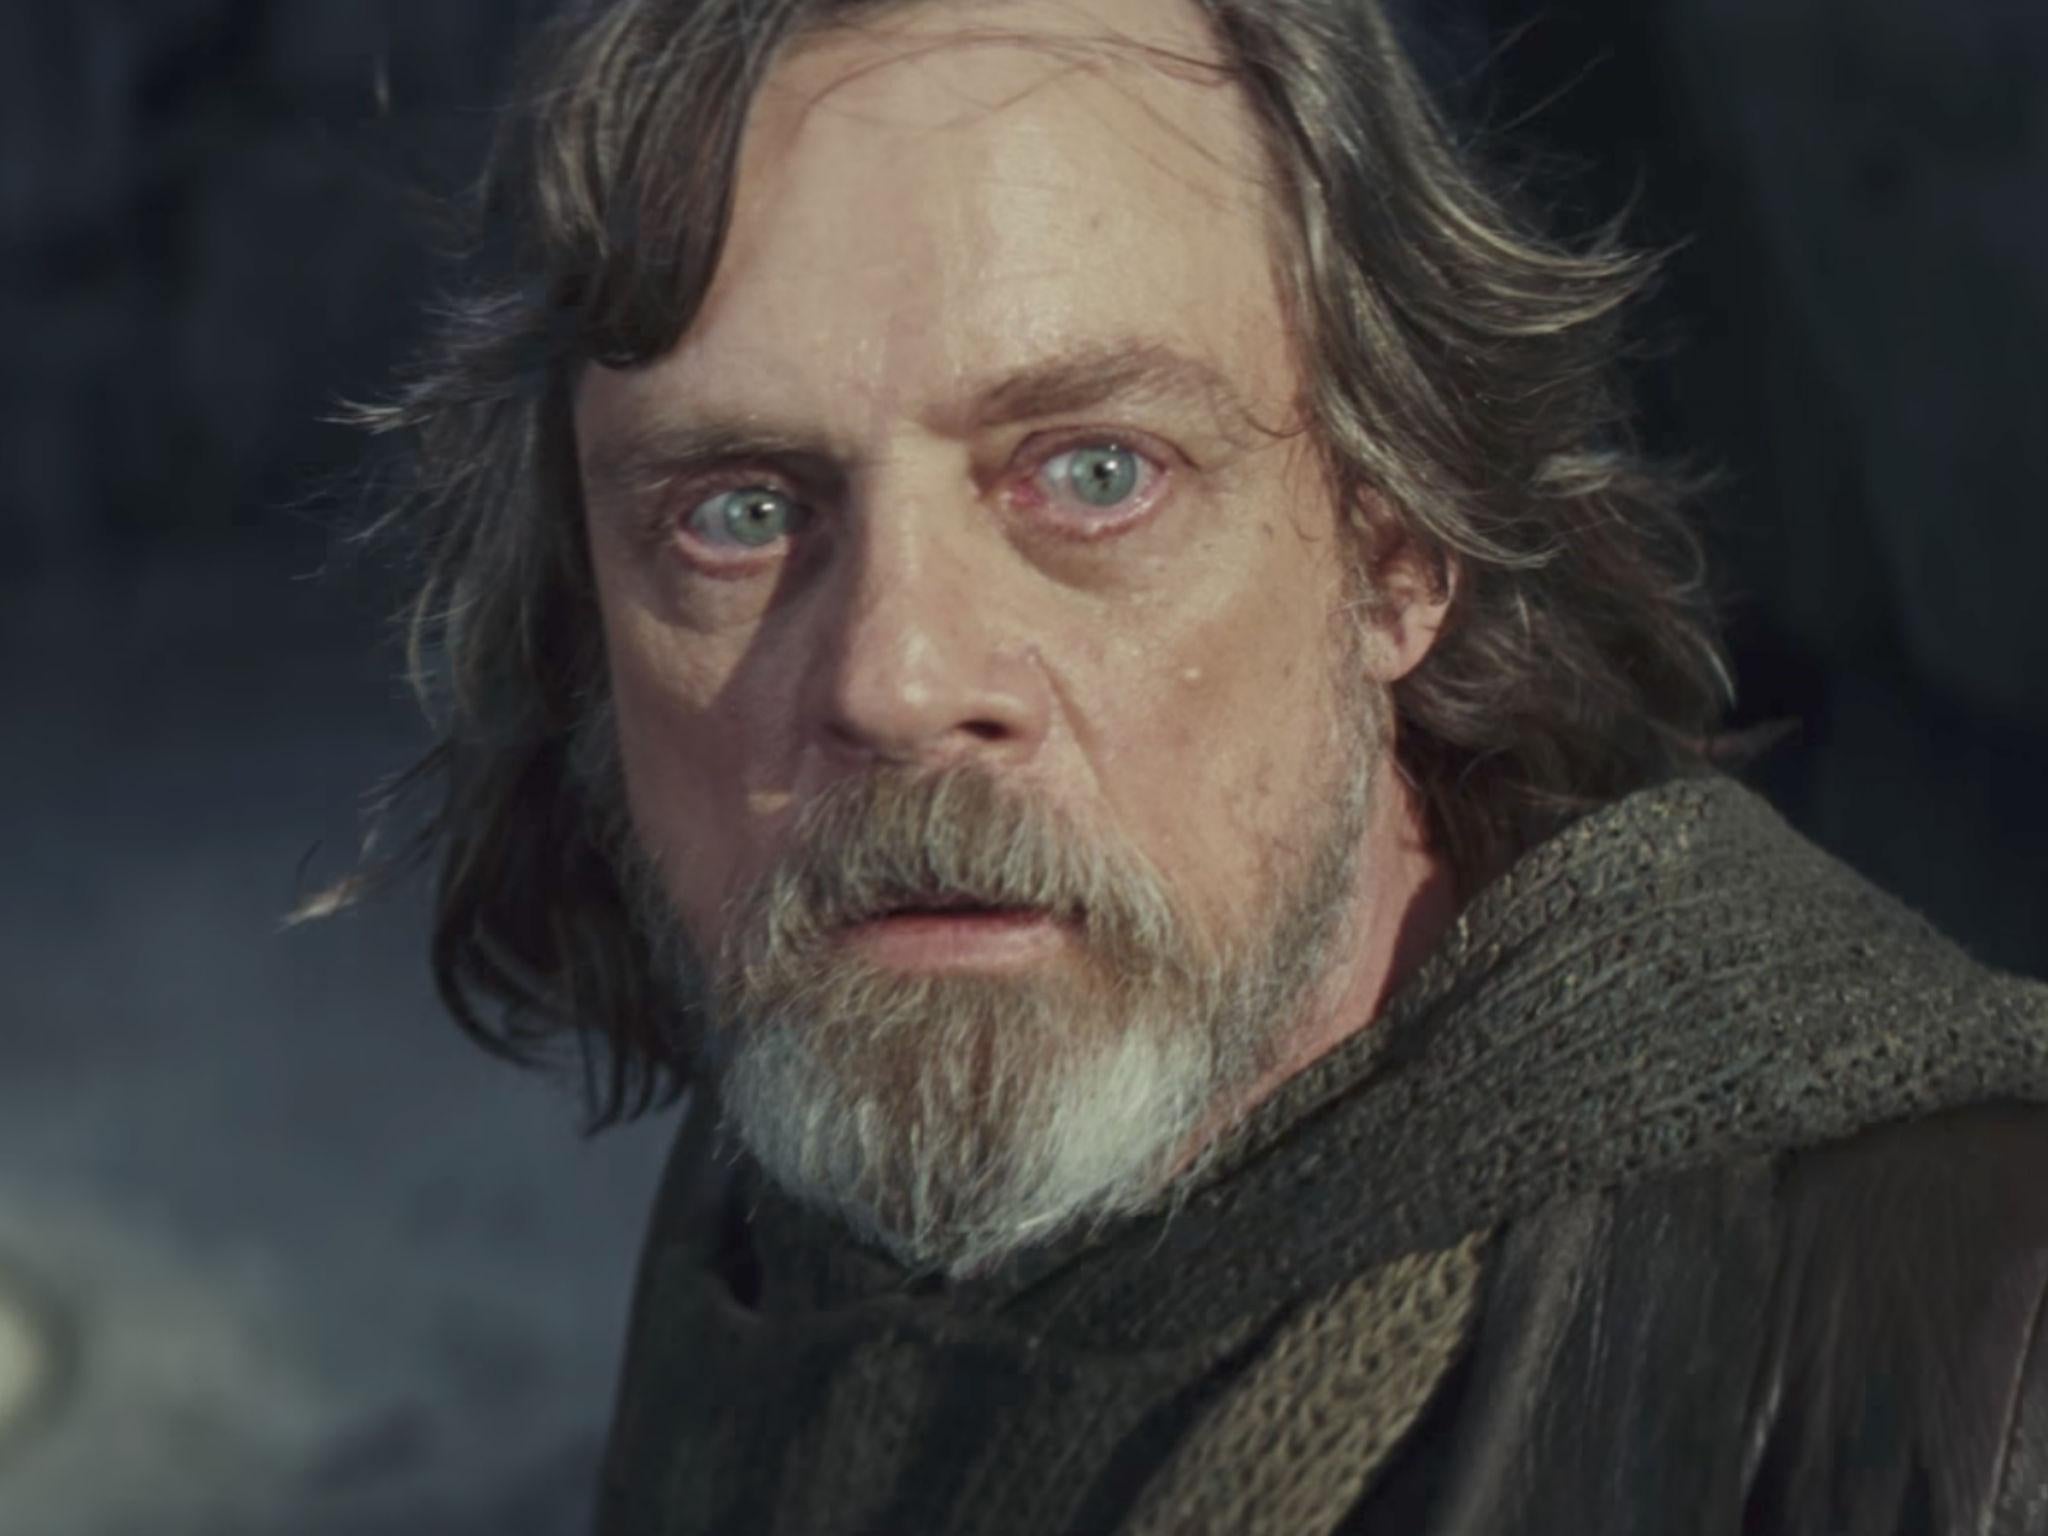 star-wars-8-the-last-jedi-trailer-has-finally-been-released-the